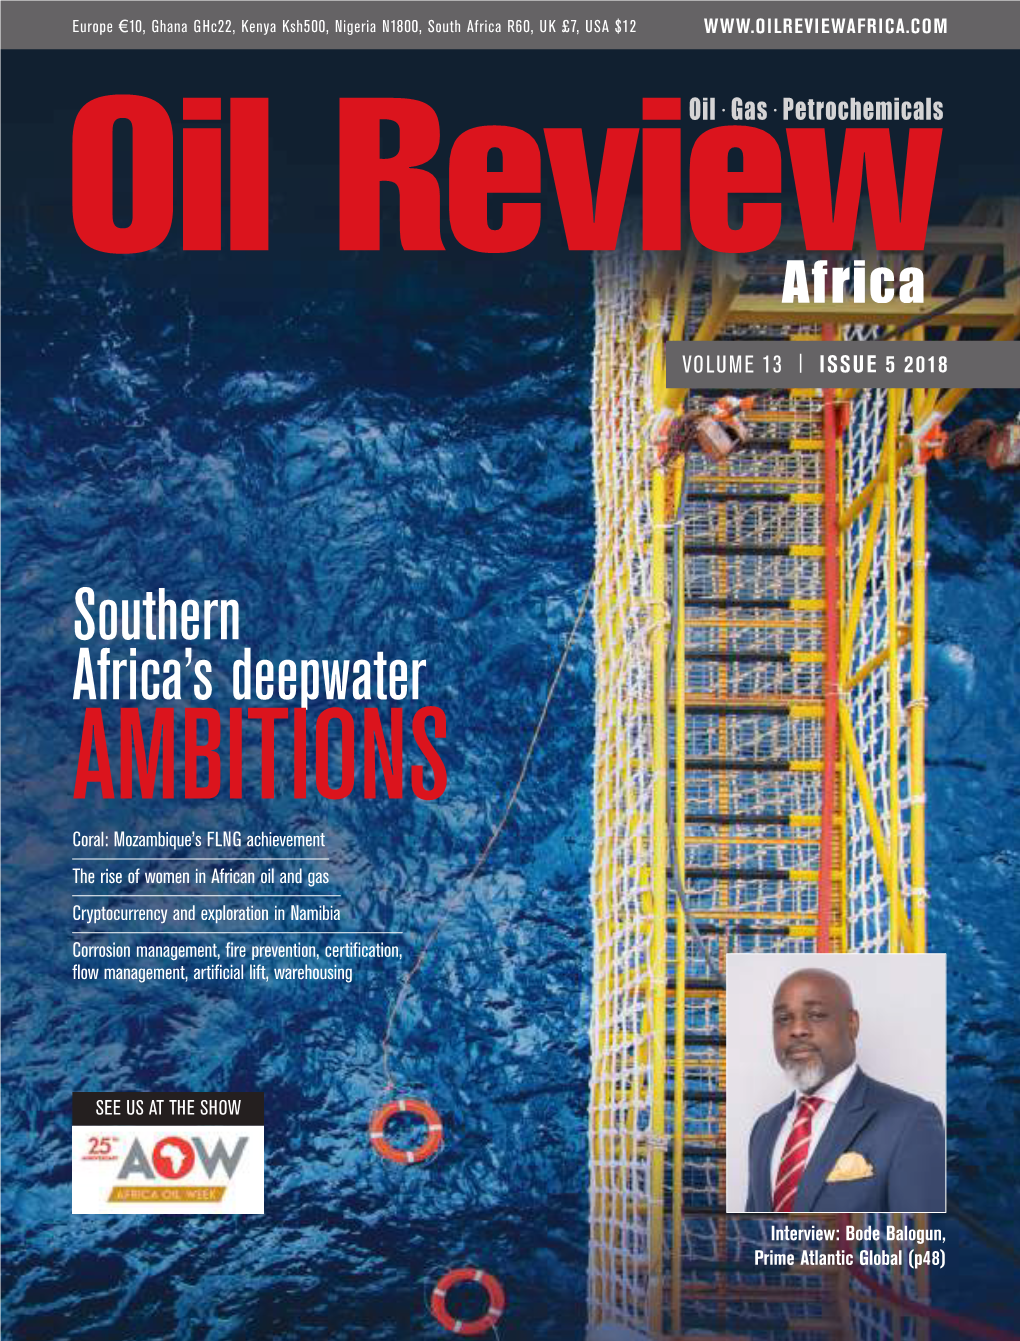 Nigeria N1800, South Africa R60, UK £7, USA $12 OIL REVIEW AFRICA - VOLUME 13 - ISSUE 5 2018 2018 5 13 ISSUE - VOLUME - AFRICA REVIEW OIL